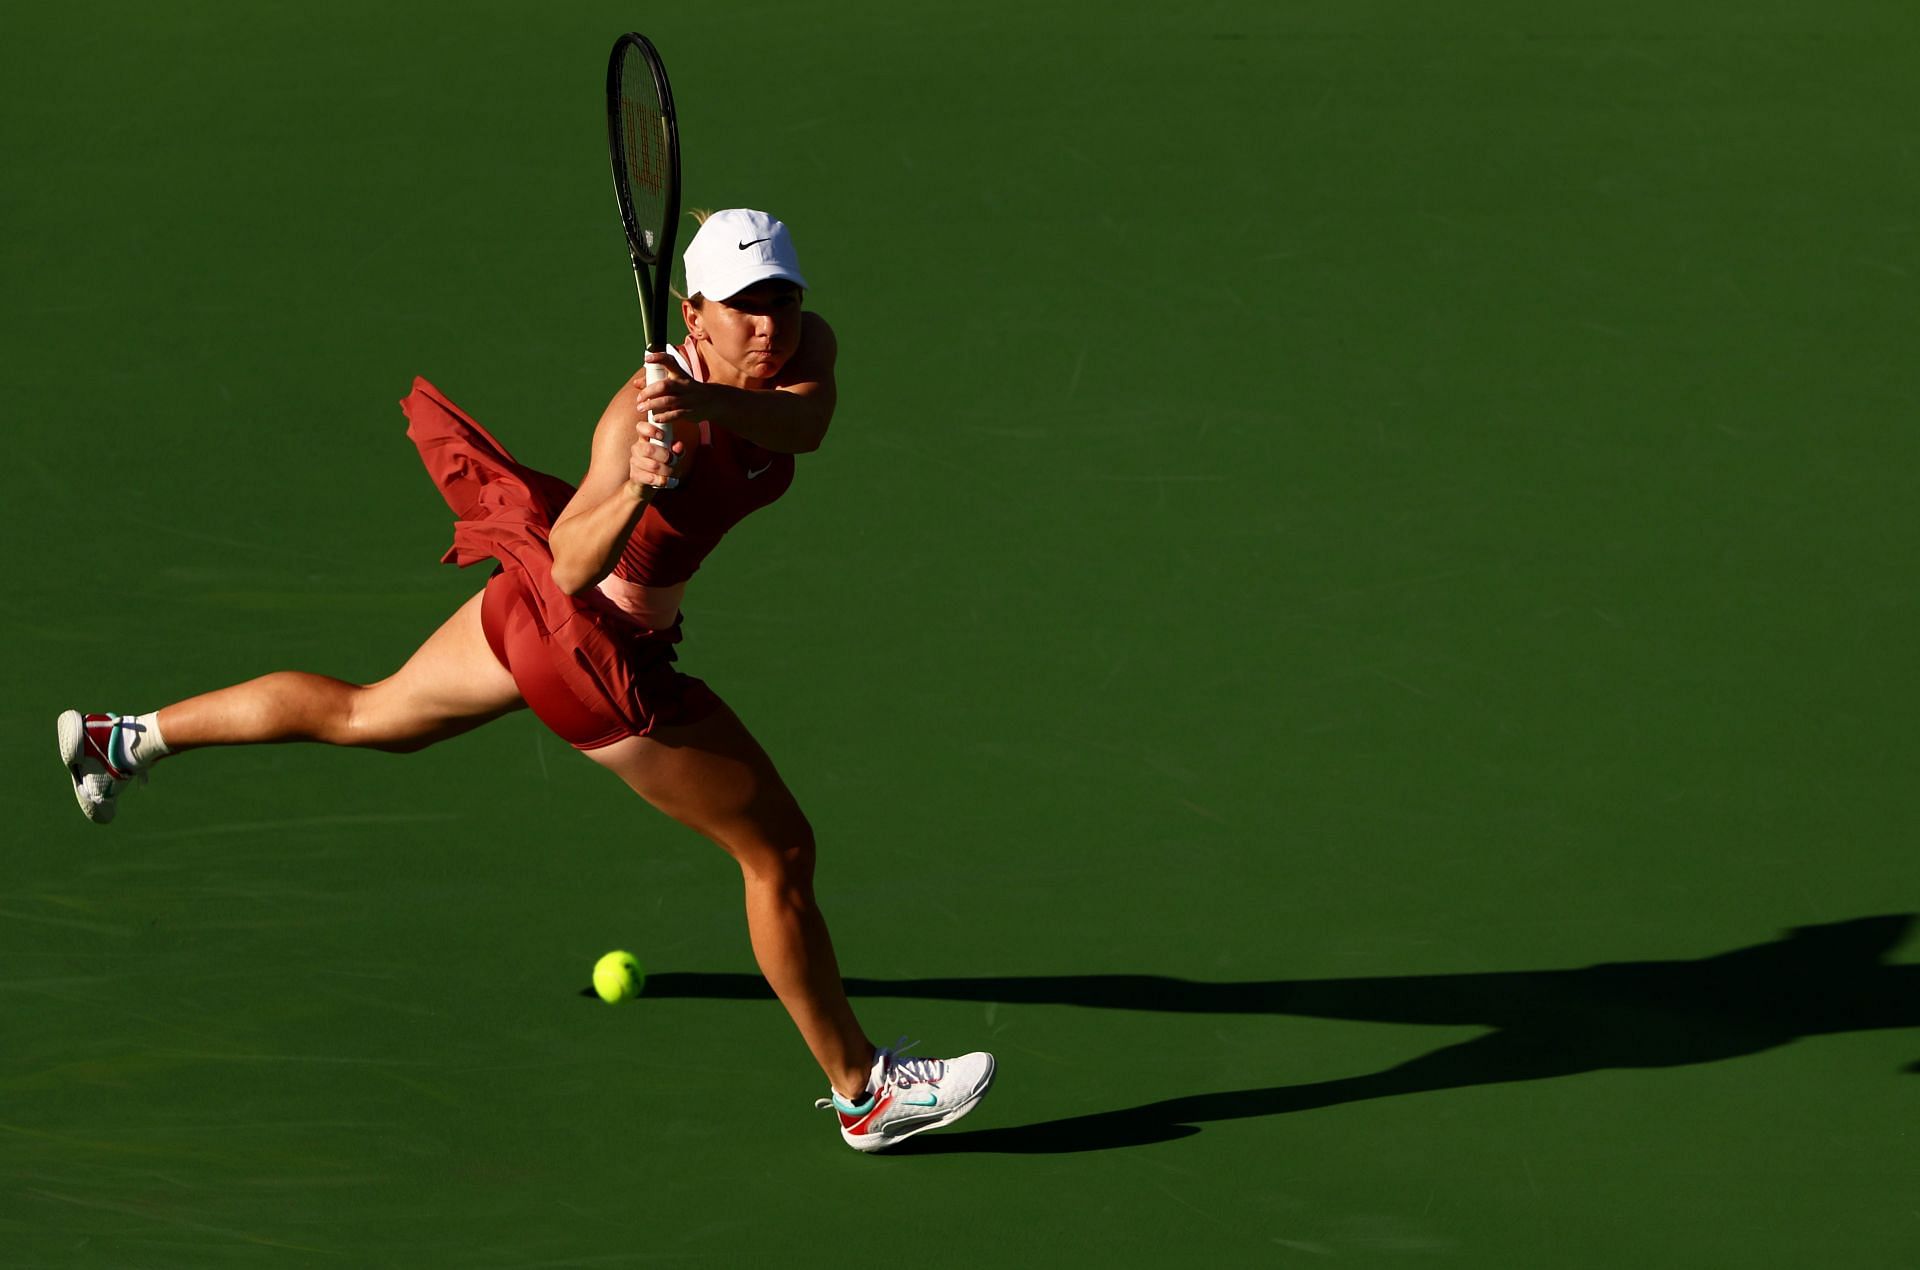 Simona Halep in action at the BNP Paribas Open